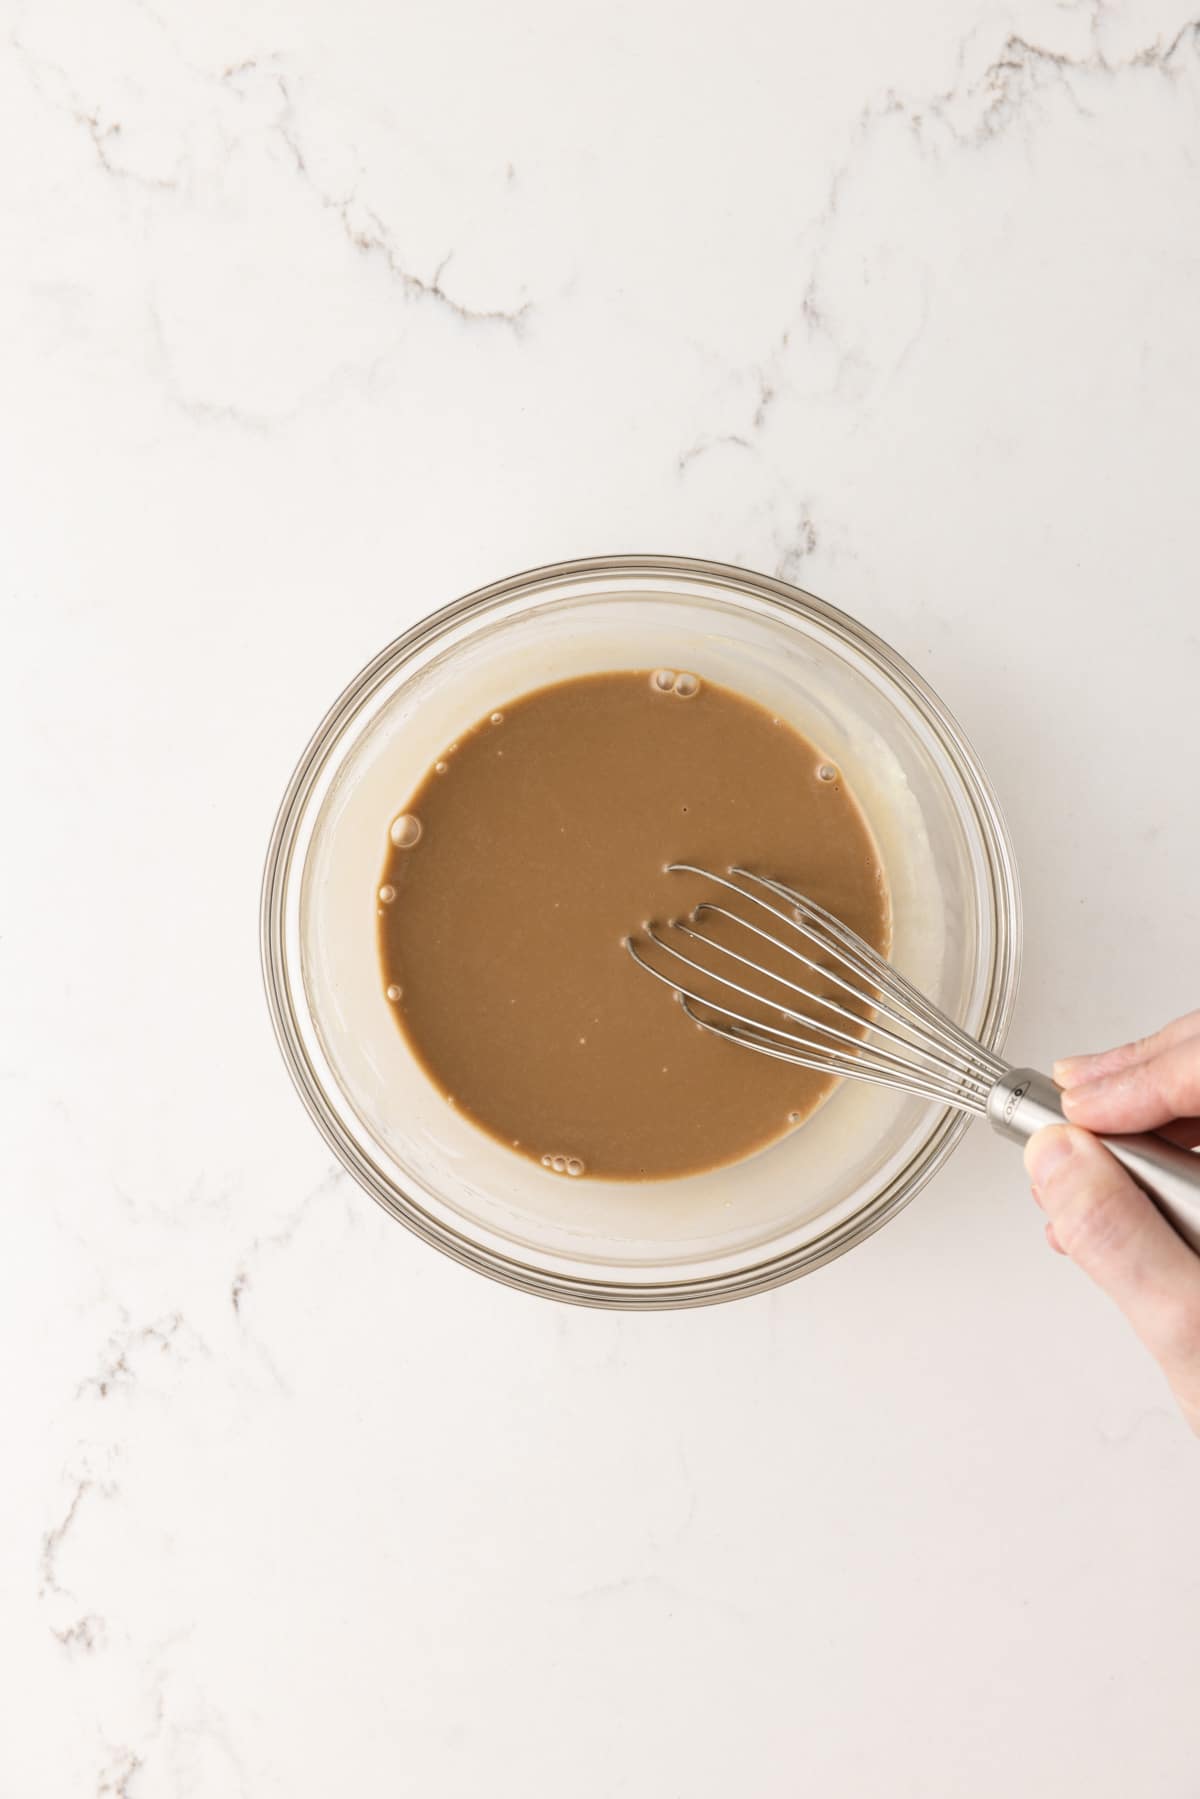 Balsamic dressing in a glass bowl with whisk.